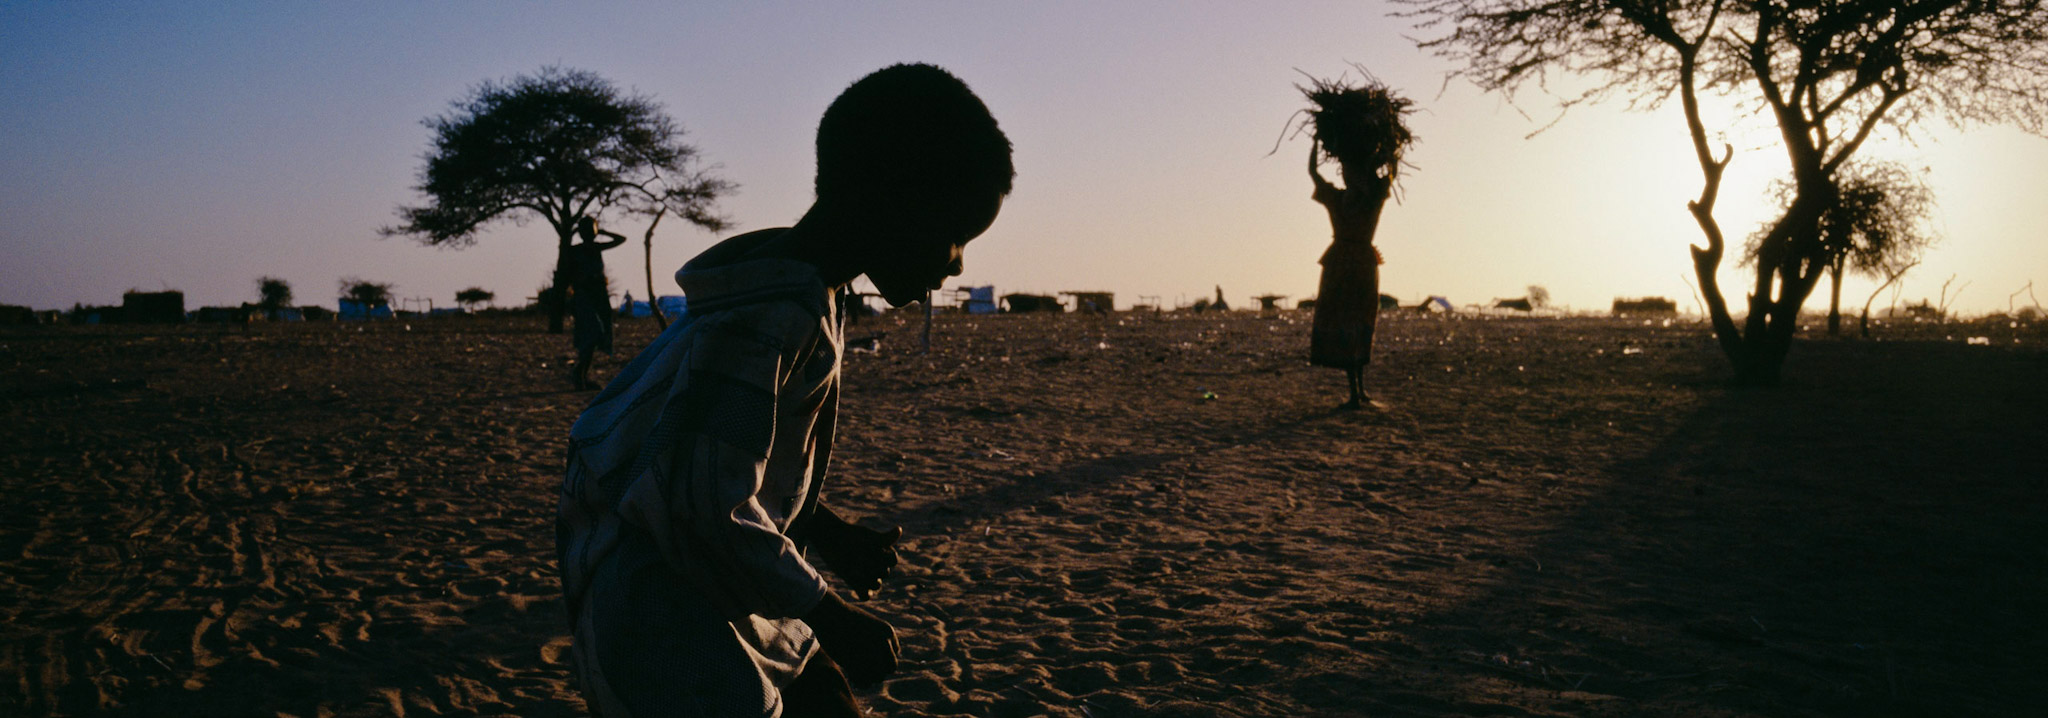 Silhouette of a child crosses in front of the camera with a silhouette of a woman carrying a bundle on her head in the background (Darfur, Sudan)